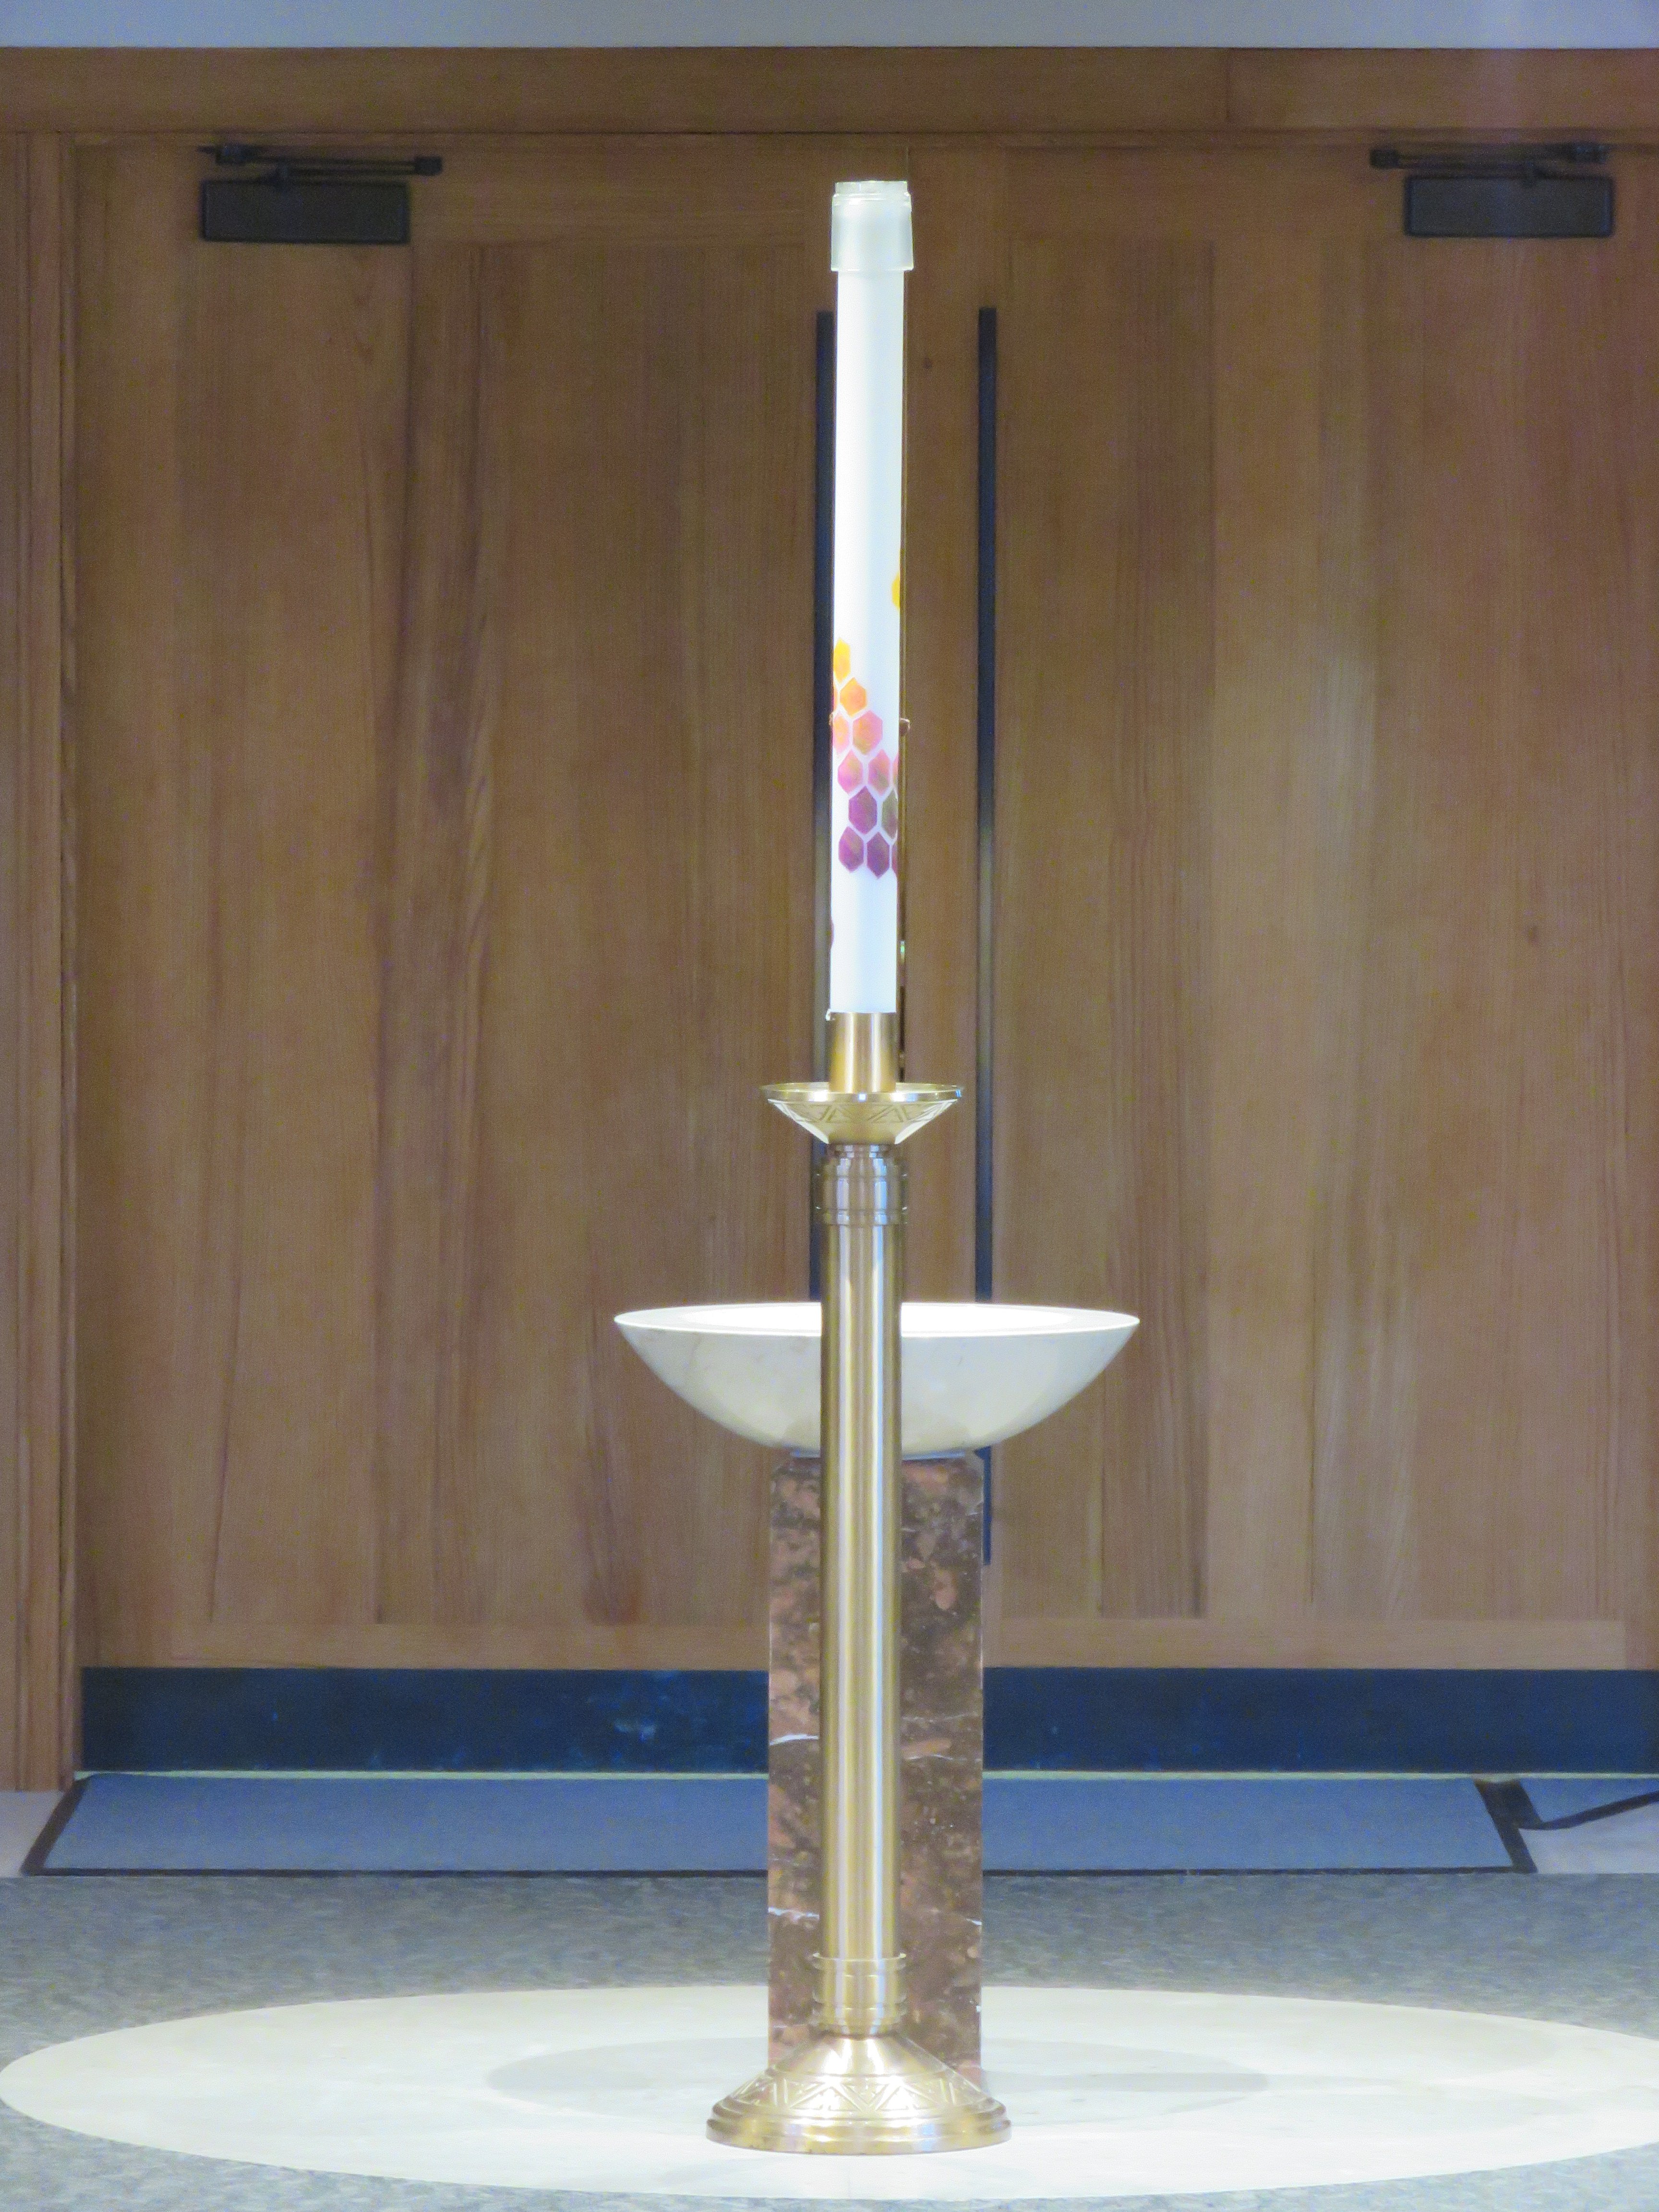 image of Baptismal Font and Paschal Candle Candle at St. Mary's Barrie